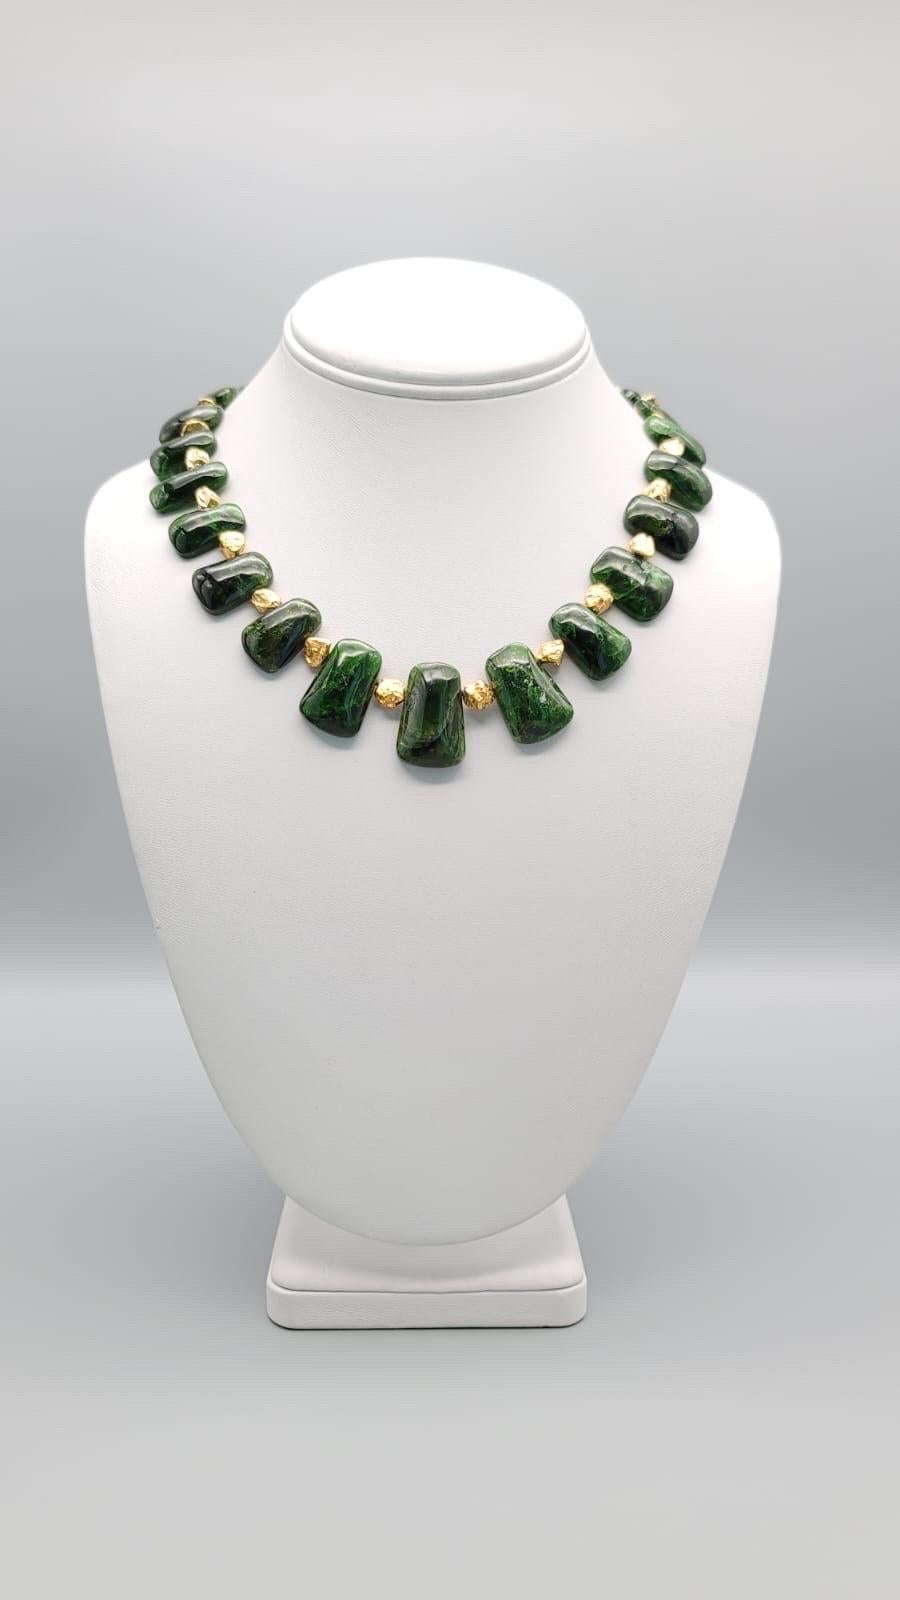 A.Jeschel Richly colored Chrome Diopside necklace 11